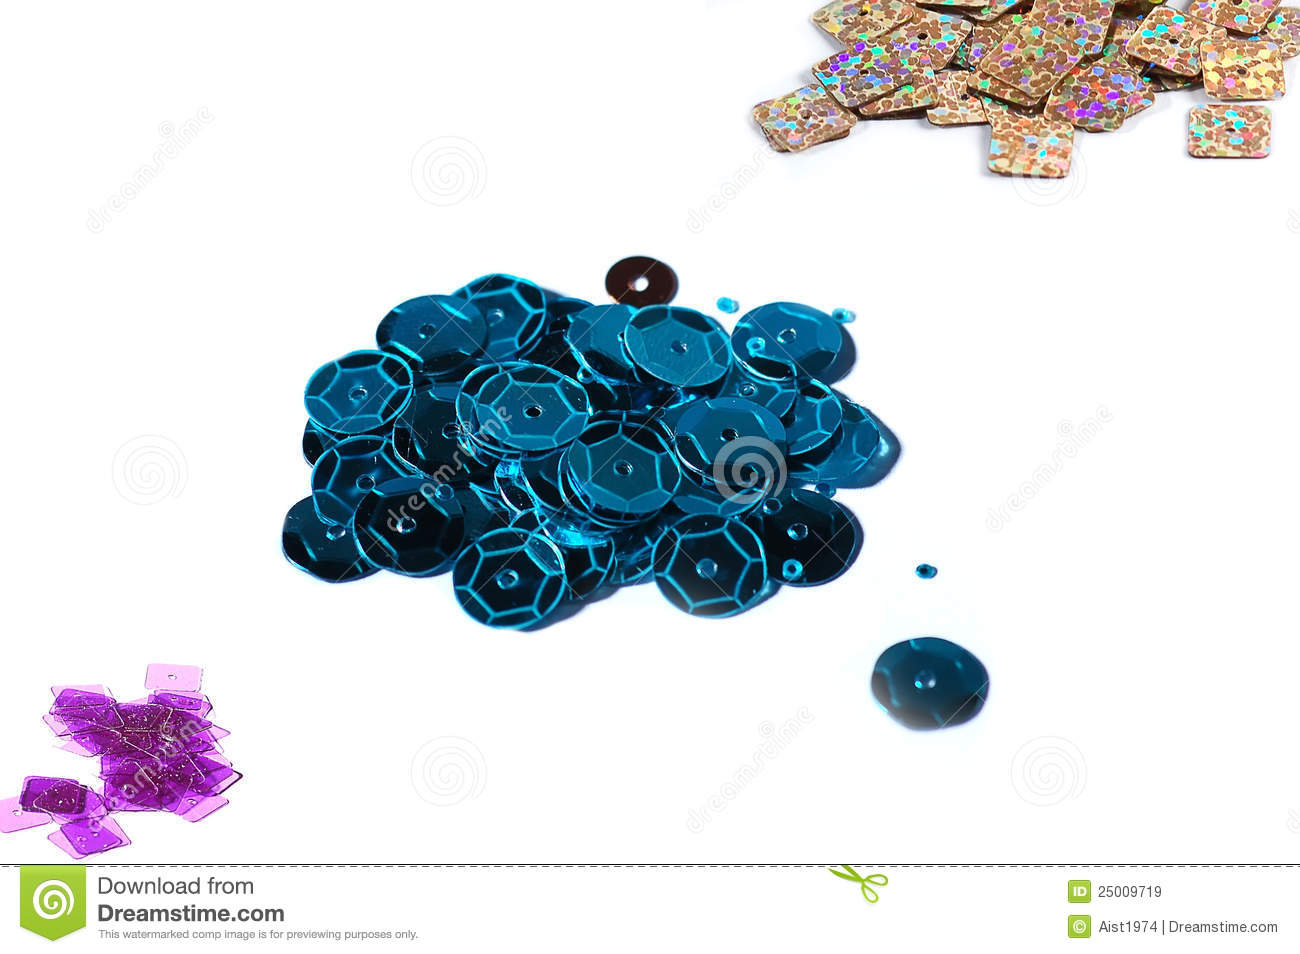 Pile Of Decorative Craft Sequins Royalty Free Stock Images   Image